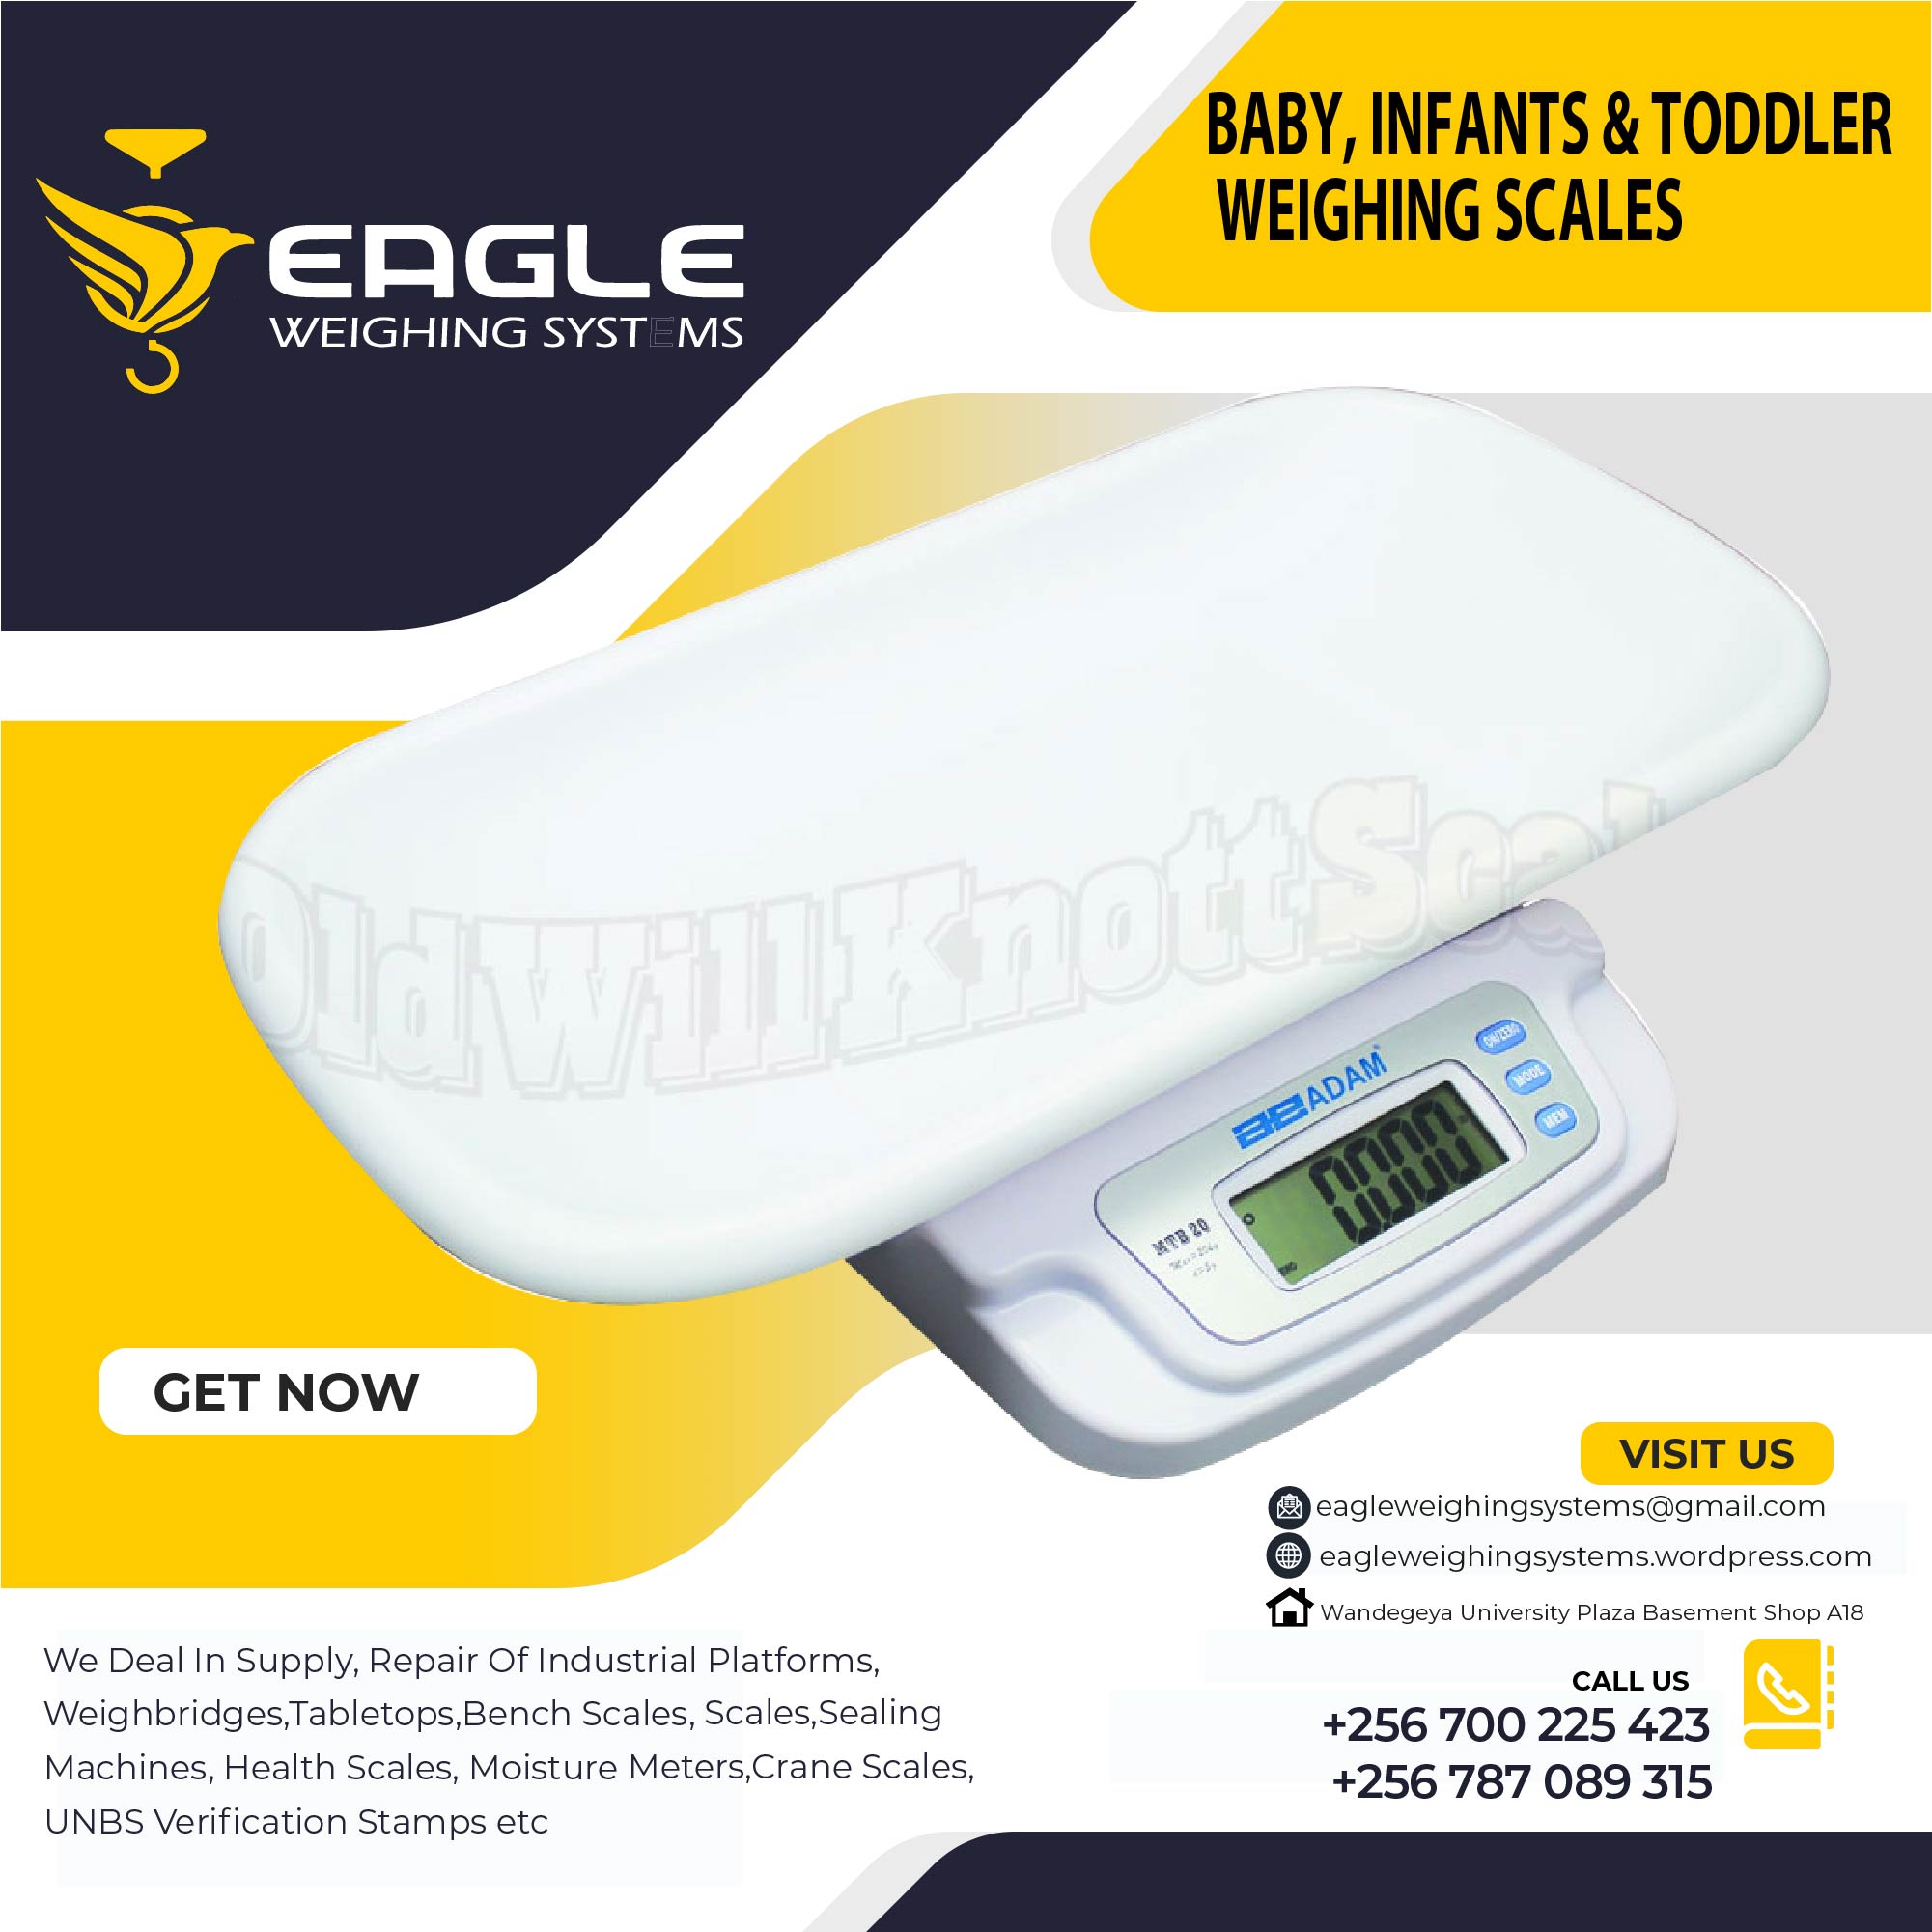 +256 (0) 700225423 Baby Weighing Scales Manufacturer, Kampala Central Division, Central, Uganda